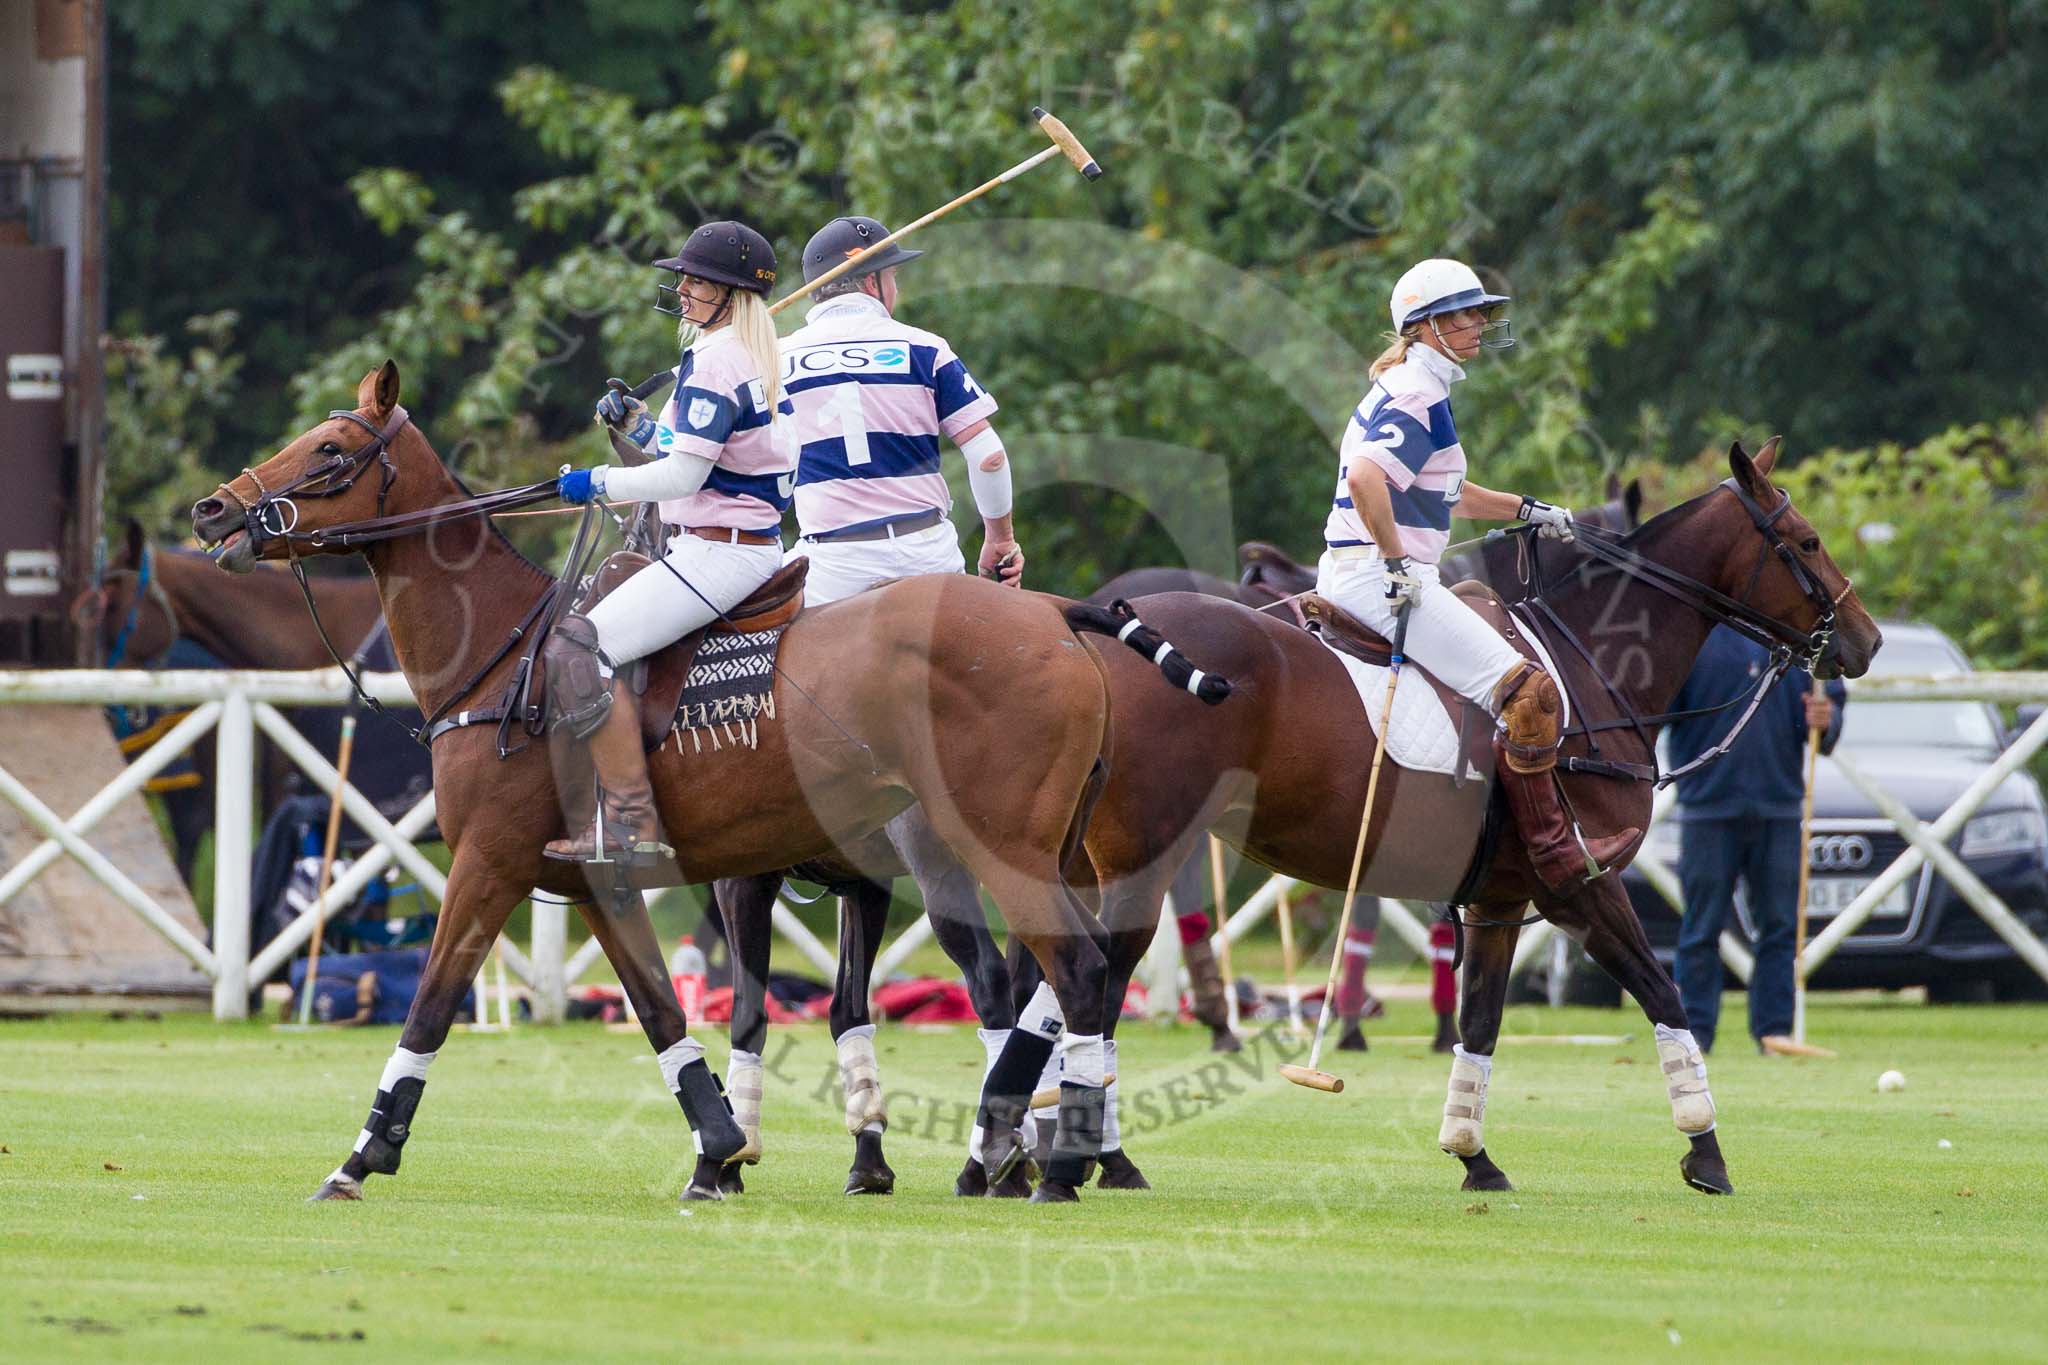 DBPC Polo in the Park 2012: JCS Polo team #3 Emma Nicolson, #1 Andy Coulbeck, and 2 Louise Coulbeck..
Dallas Burston Polo Club,
Stoneythorpe Estate,
Southam,
Warwickshire,
United Kingdom,
on 16 September 2012 at 10:58, image #64